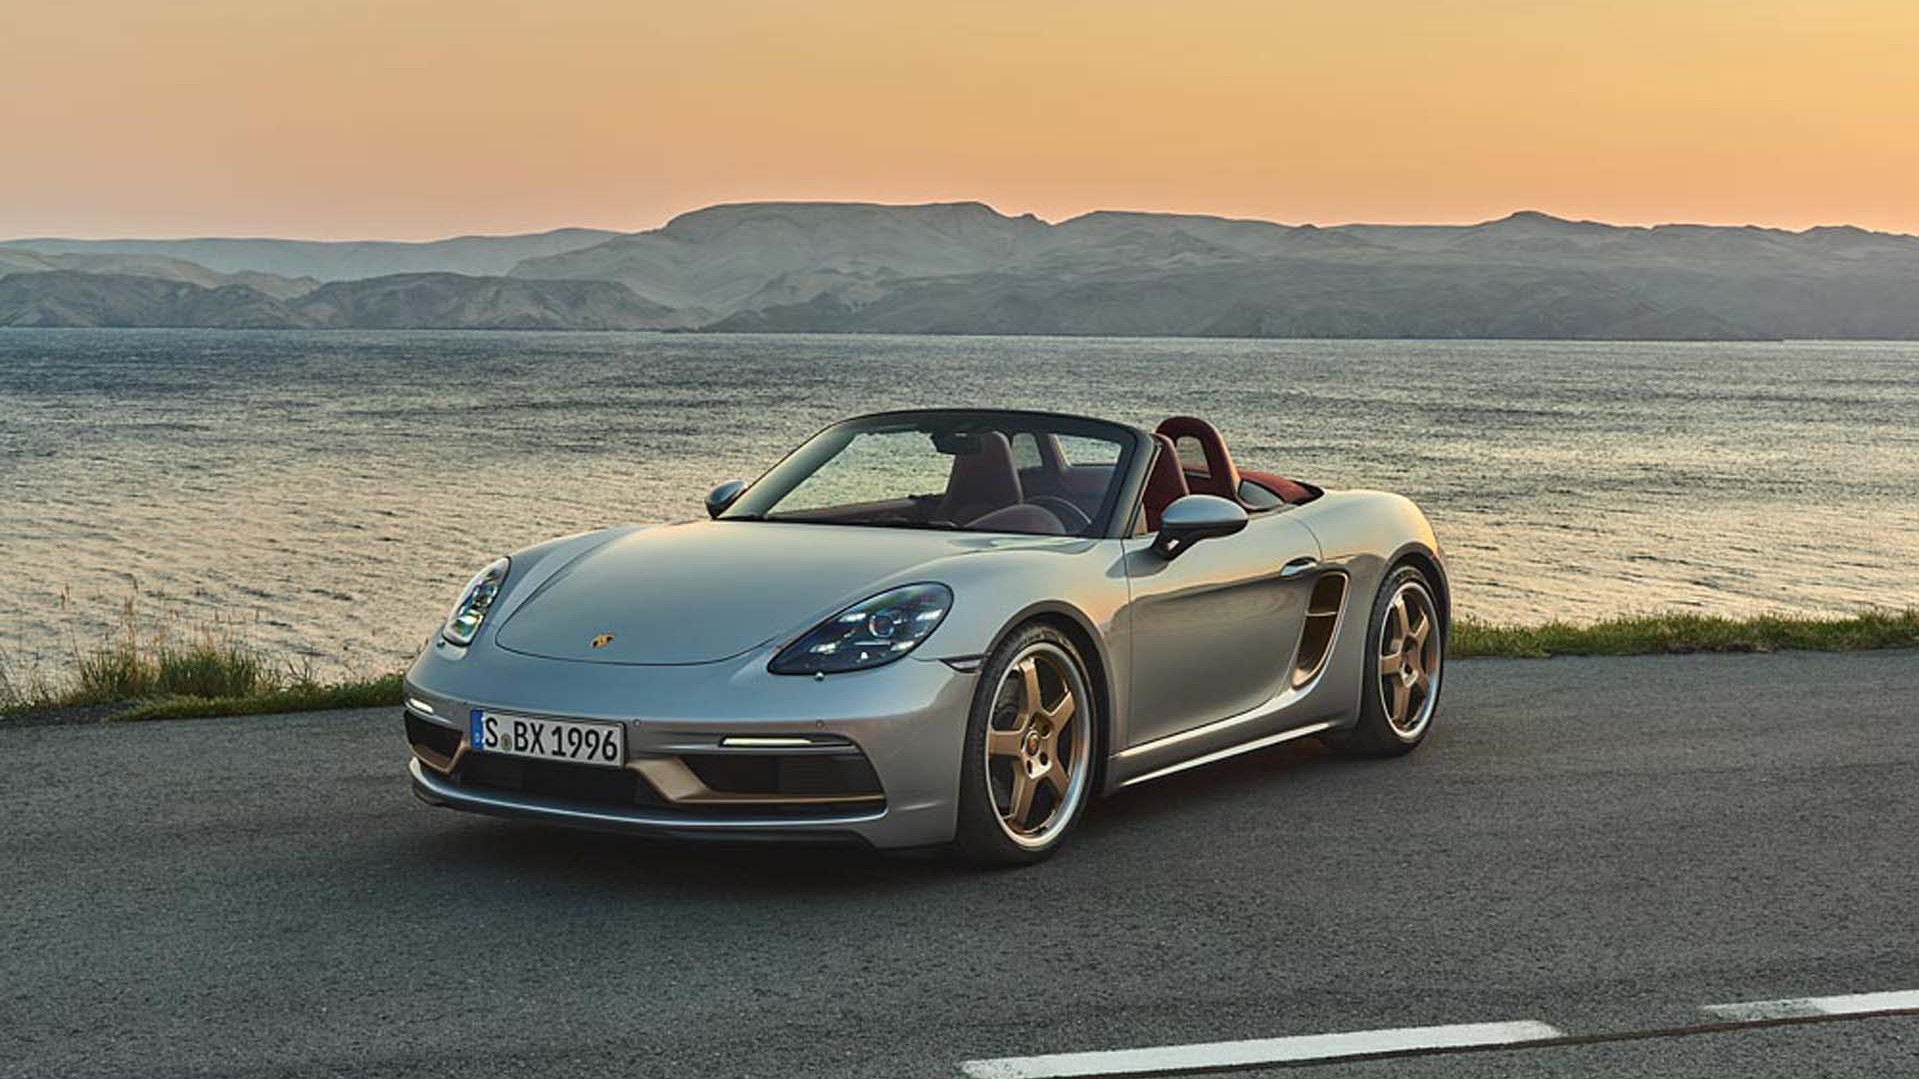 New Porsche Boxster 25 Years revisits its roots